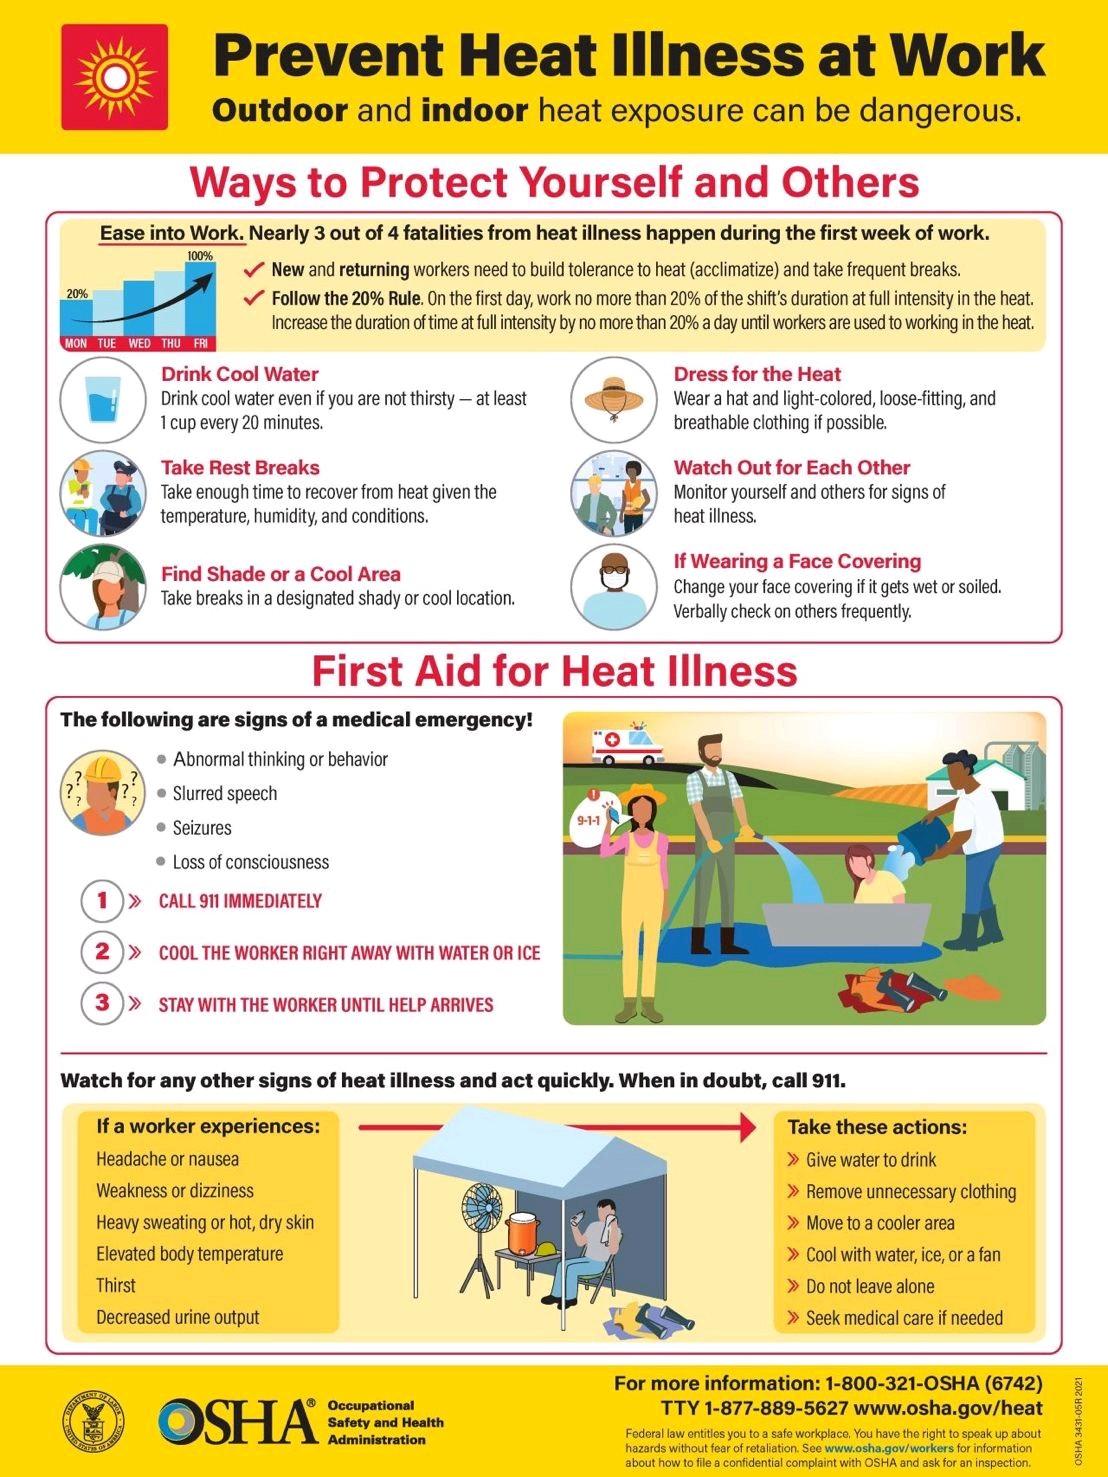 Learn protection tips and first aid for heat-related illness from OSHA.